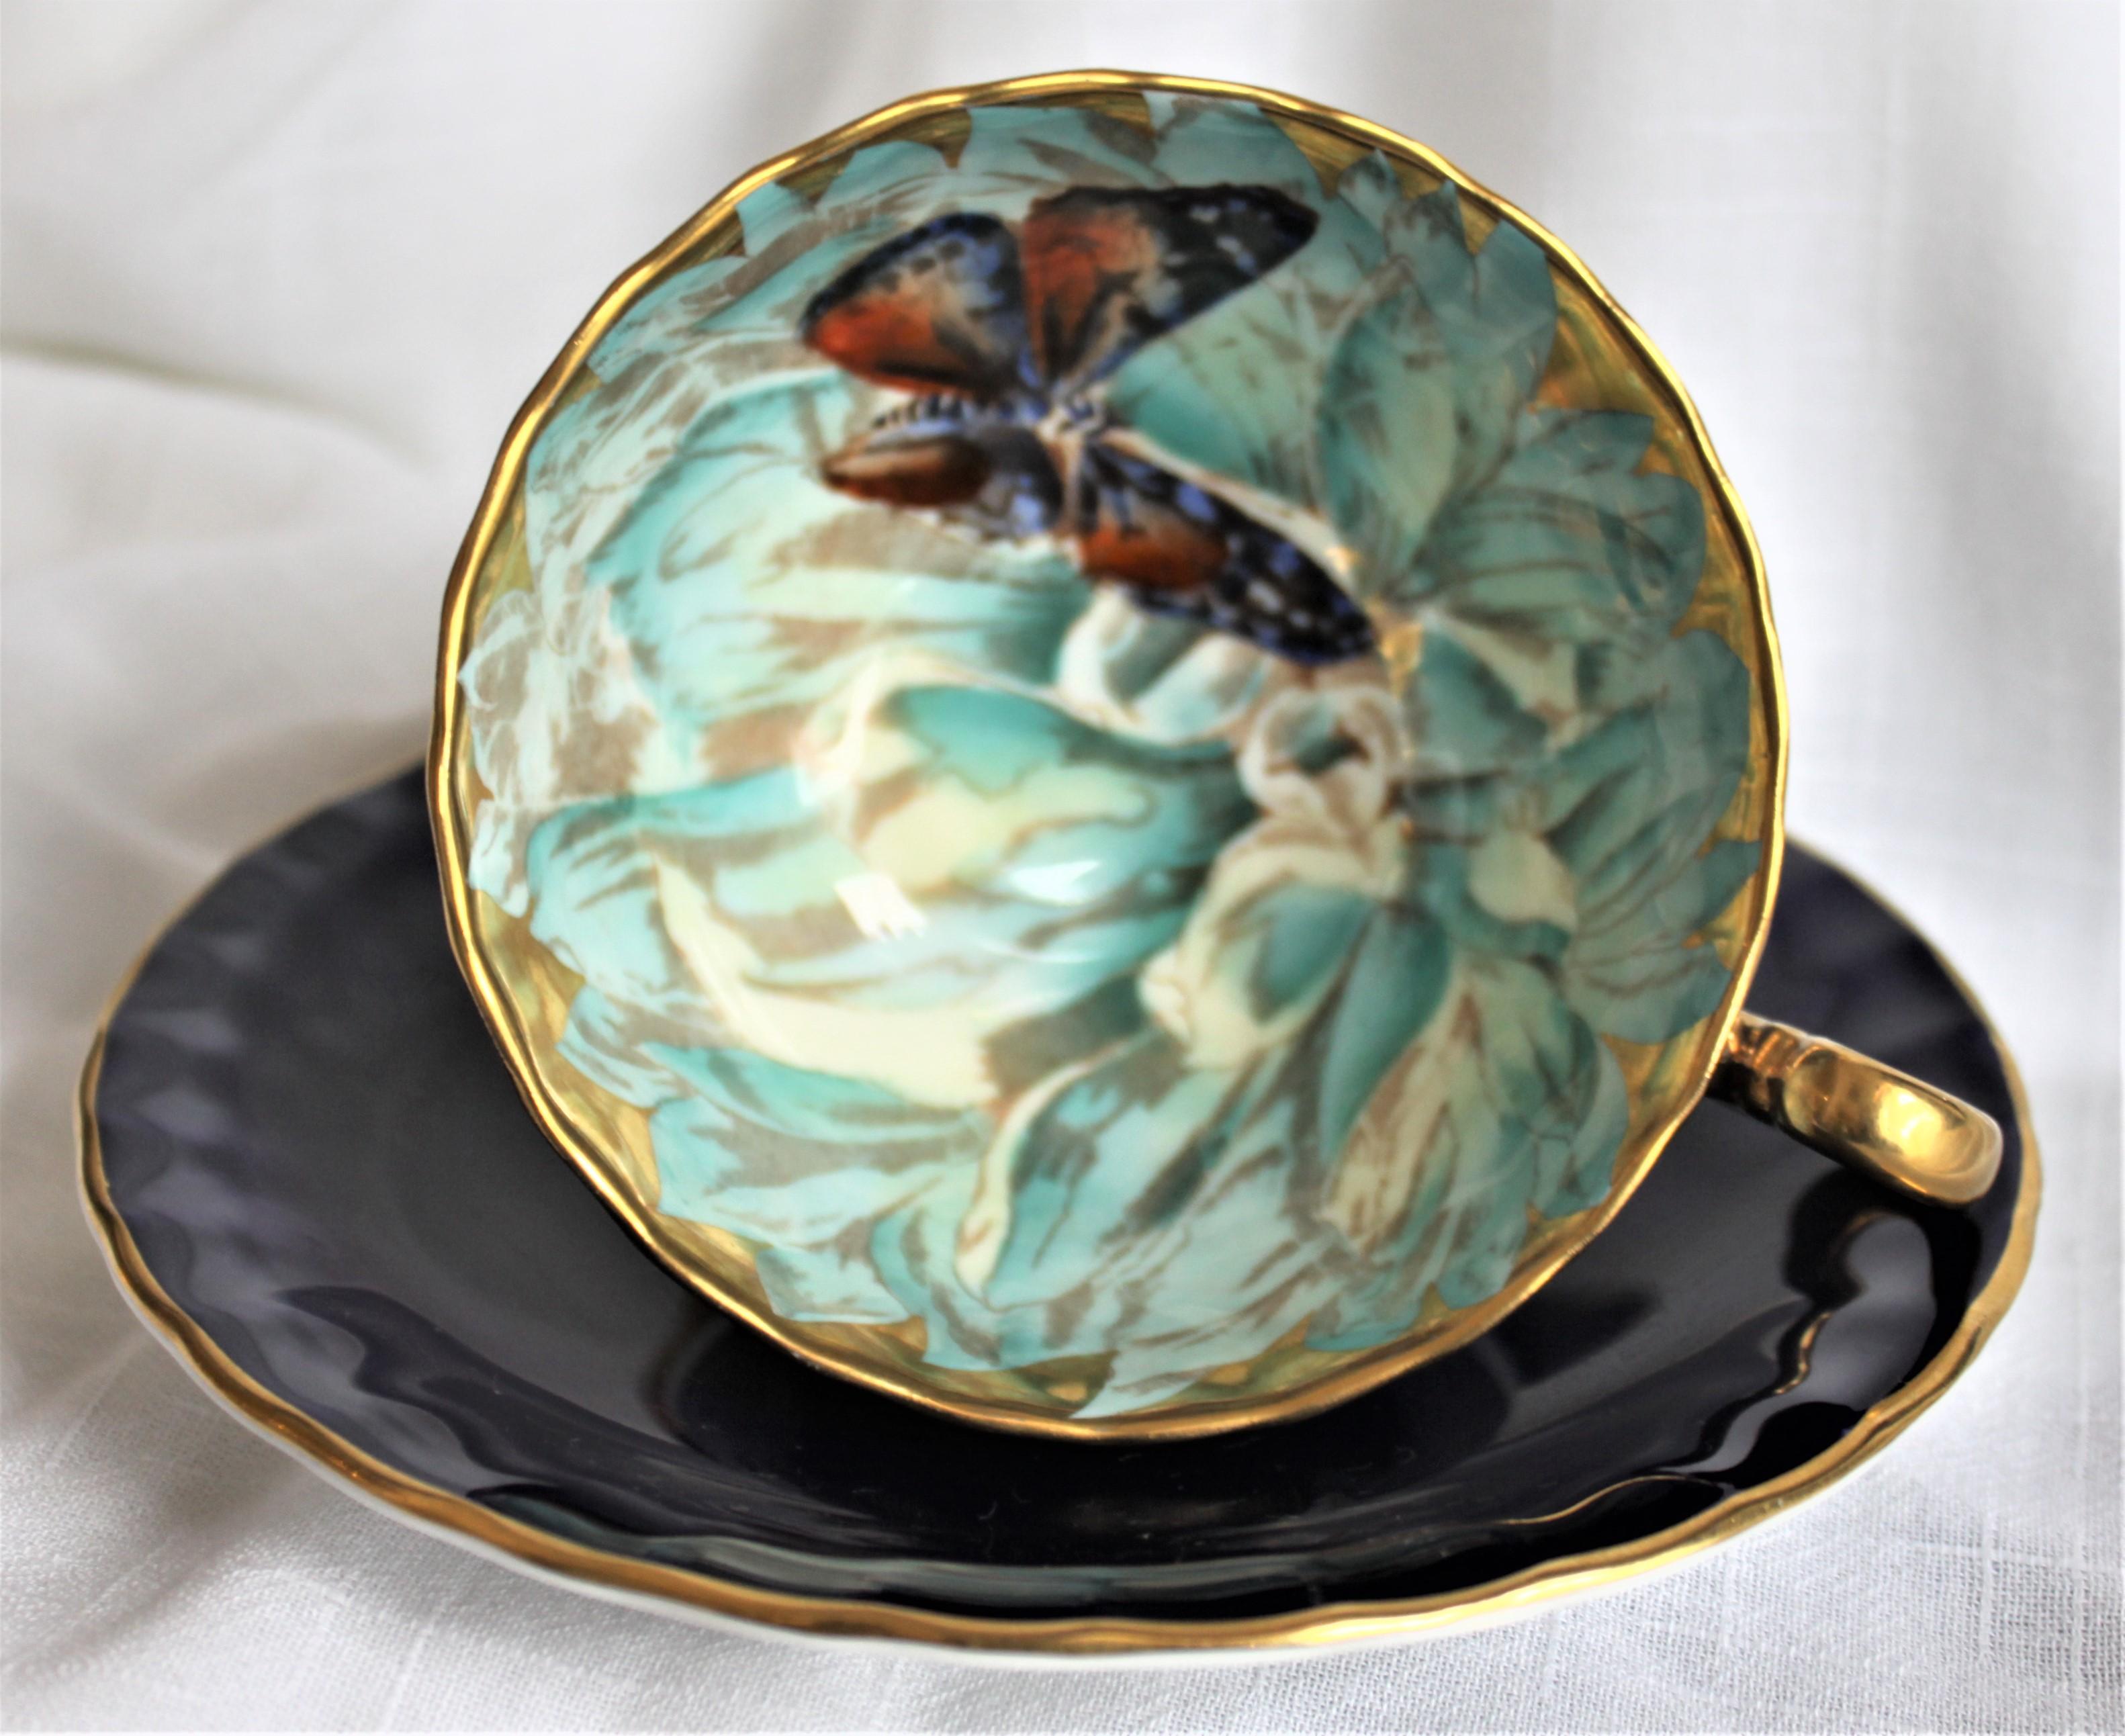 This very intricately hand painted tea cup and saucer set is made of fine bone china by the Aynsley factory of England. As presented in the photos, the bowl of the cup is done with a very well executed hand painted butterfly in a background of white